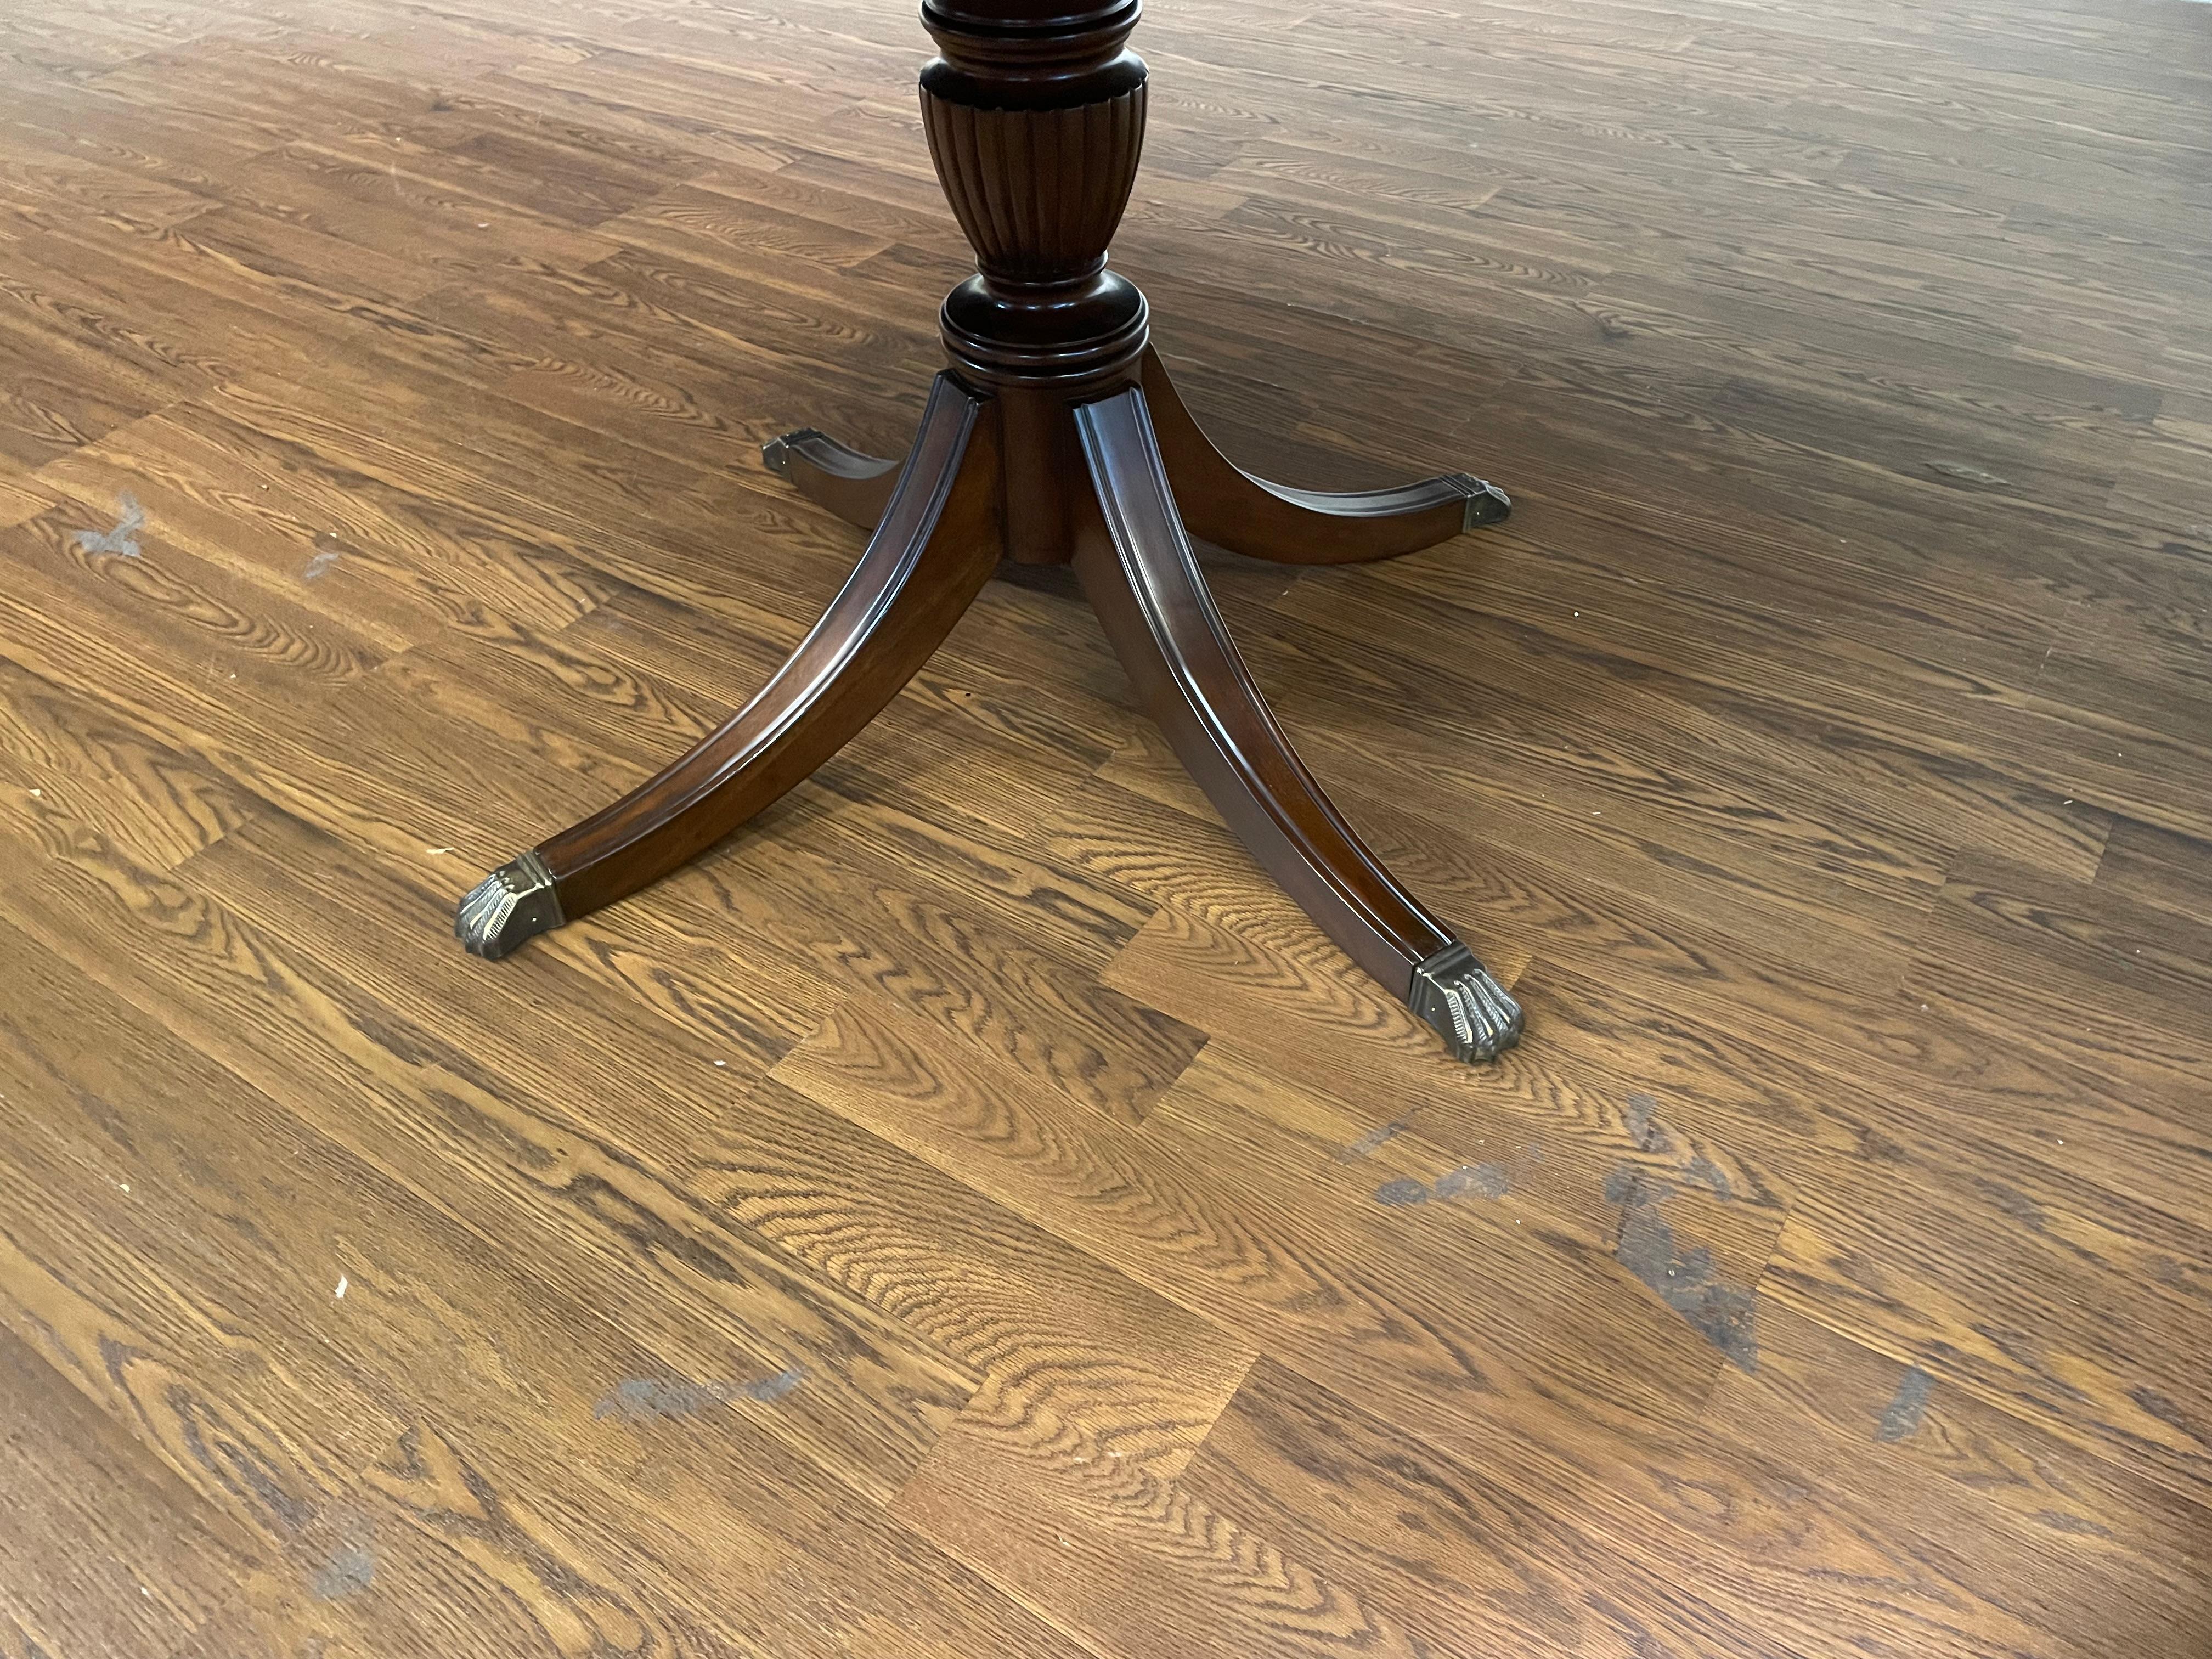 54 Inch Round Mahogany Dining Table by Leighton Hall - Showroom Sample In Good Condition For Sale In Suwanee, GA